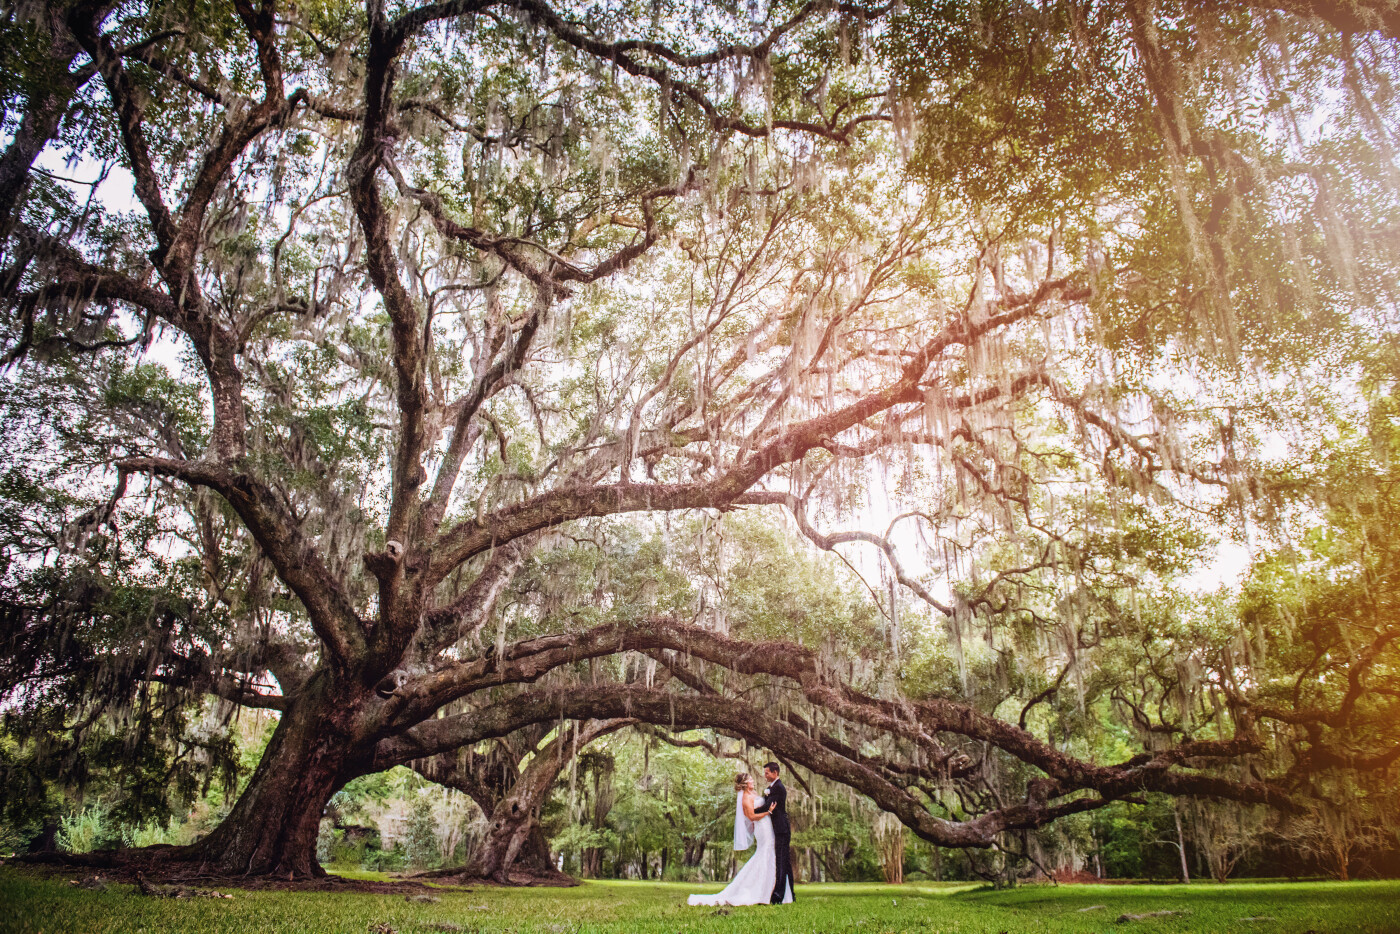 A late evening shot from Andy and Amber’s wedding at Magnolia Plantation and Gardens.  As many weddings do, we were running a bit behind and running out of light, this was one of the last shots we got in before it was too dark to use natural light.<br />
